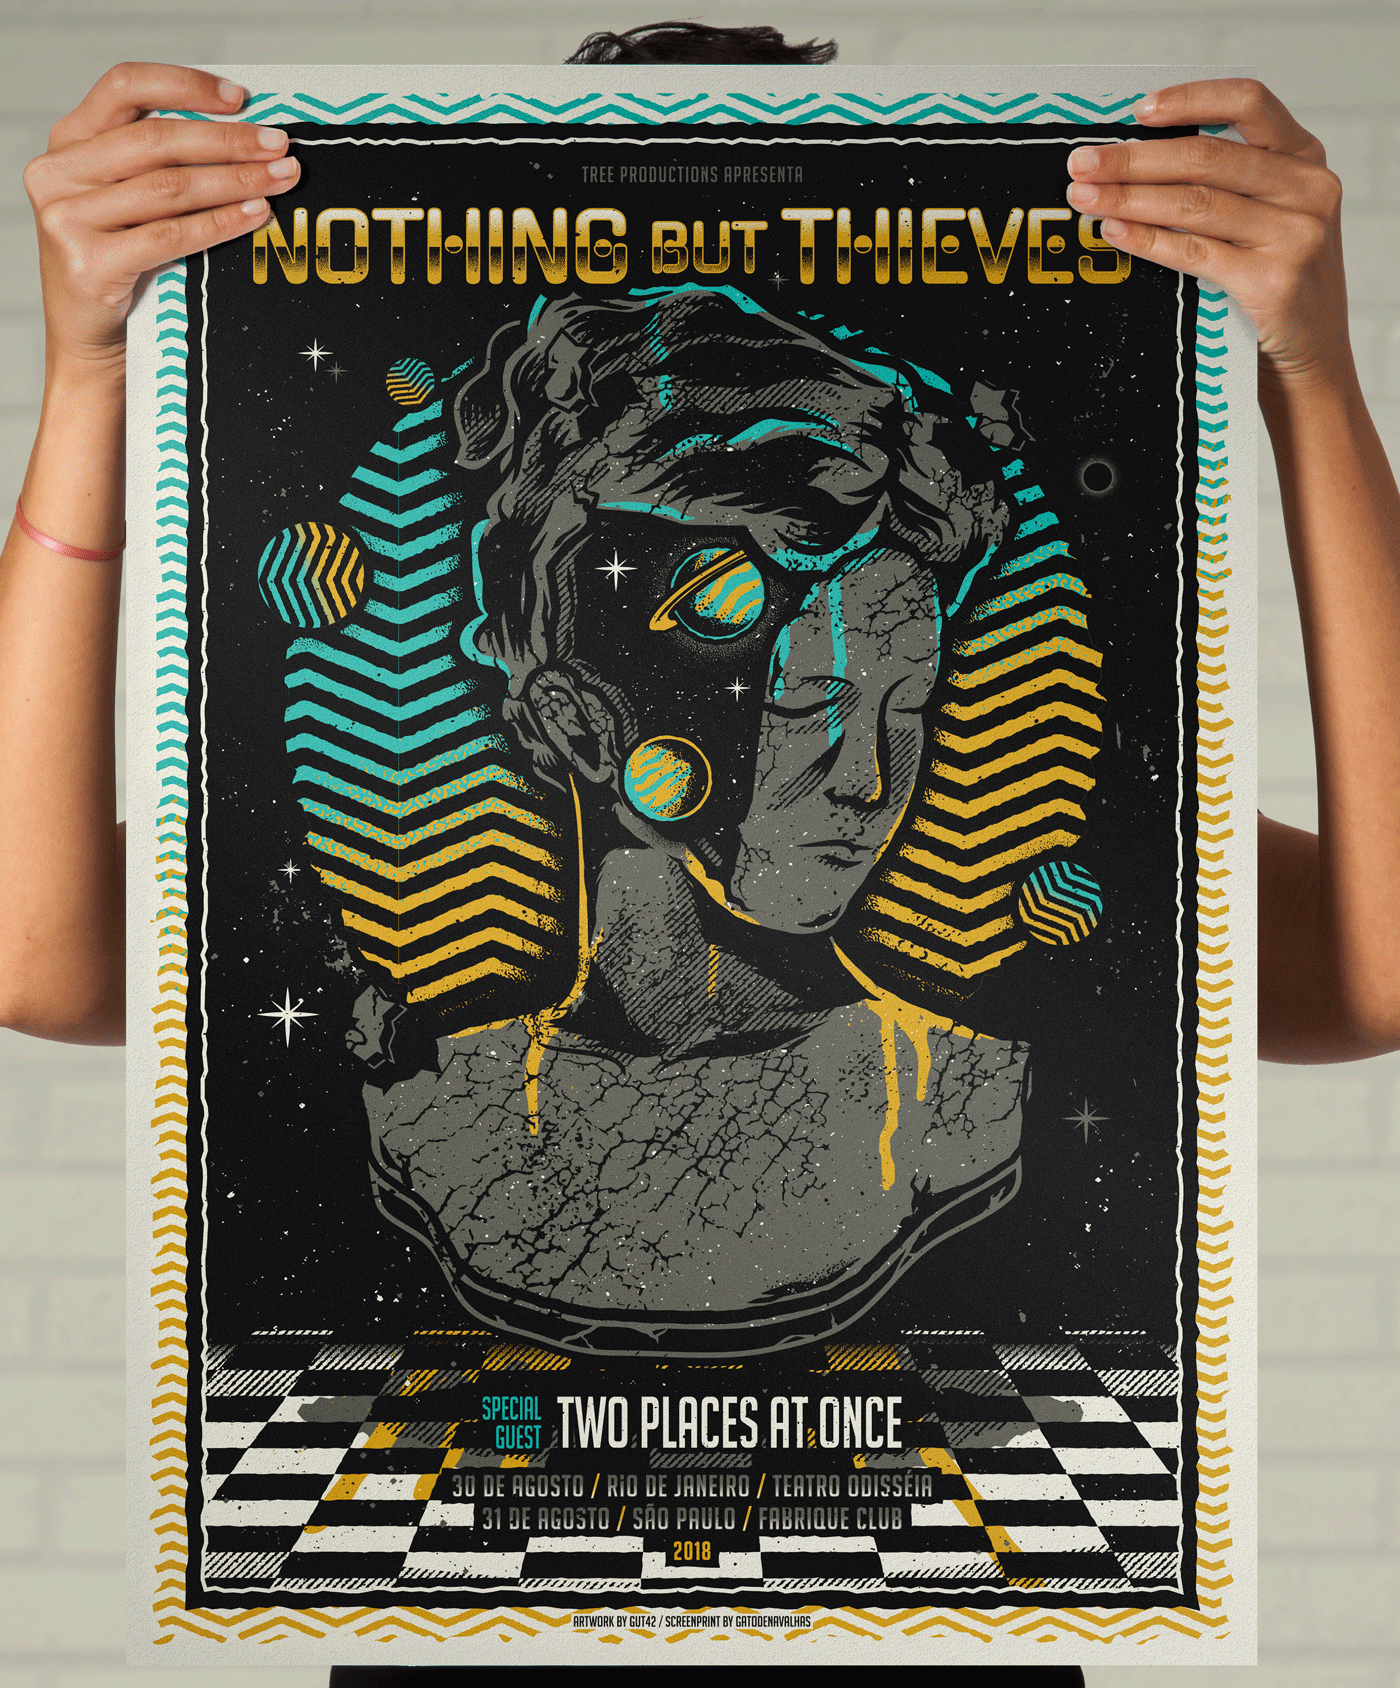 screeprint gig poster Nothing but thieves music poster statue universe aesthetic pyschedelic pantone